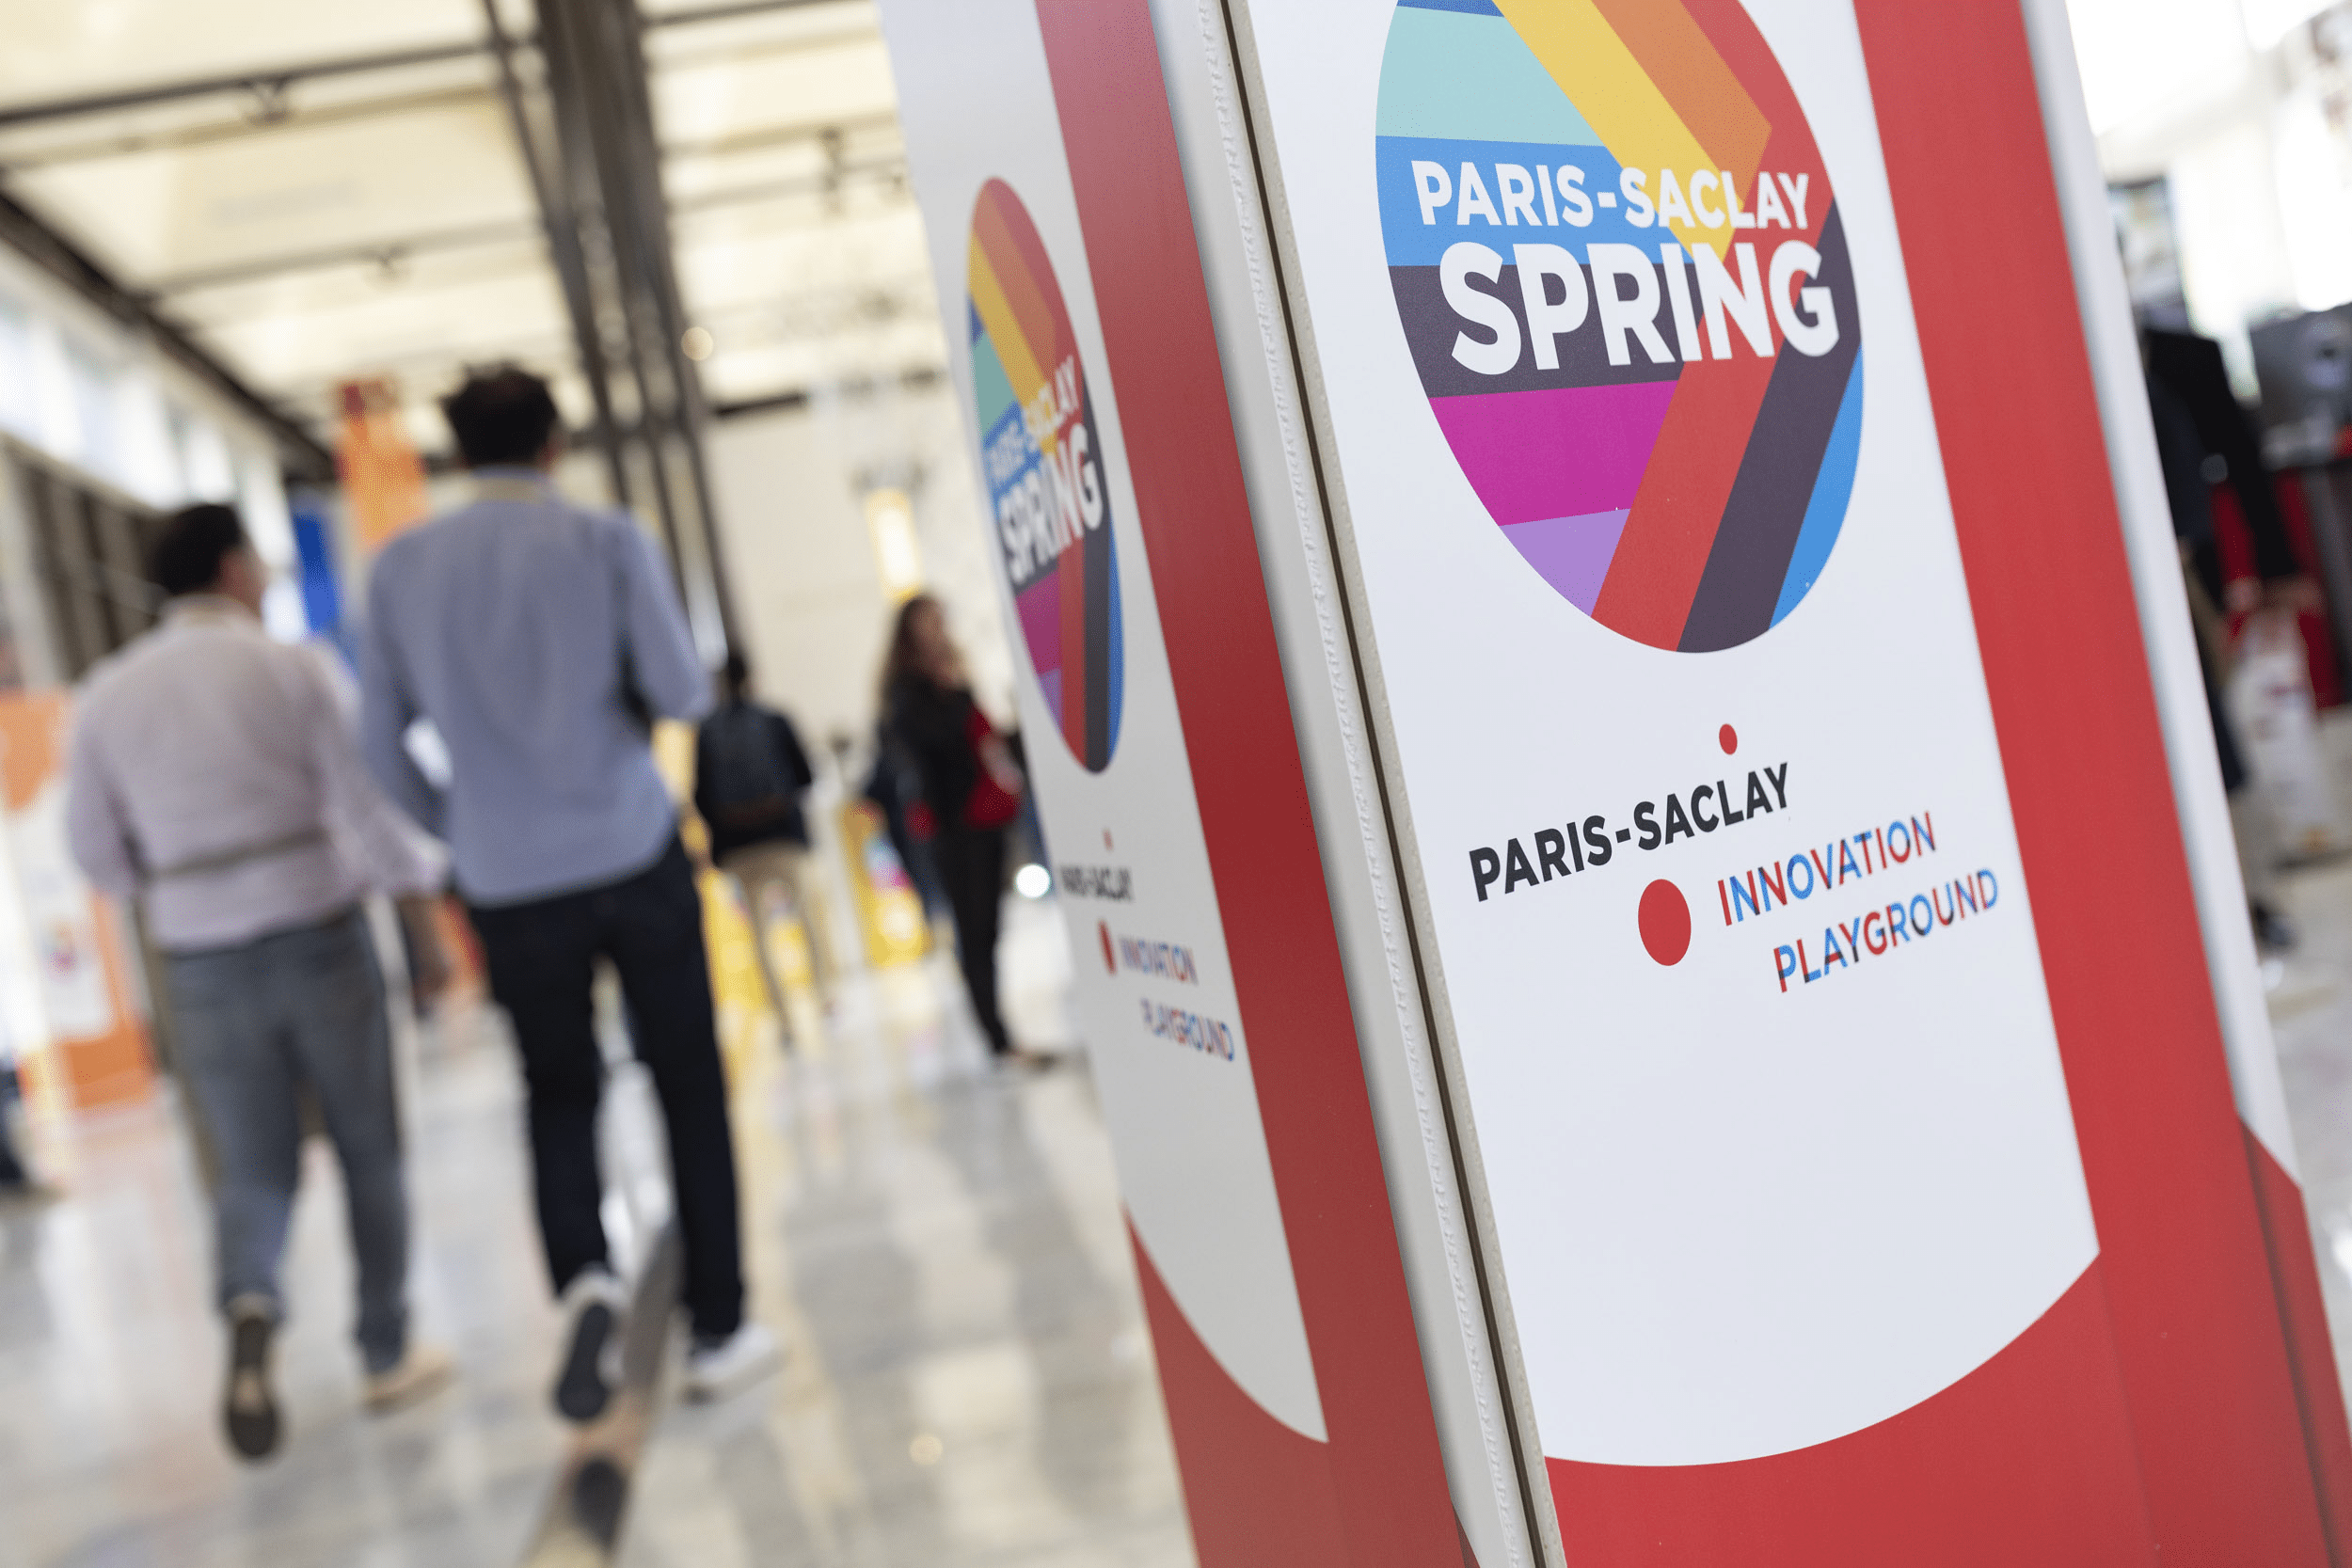 Paris Saclay Spring: the best of French innovation